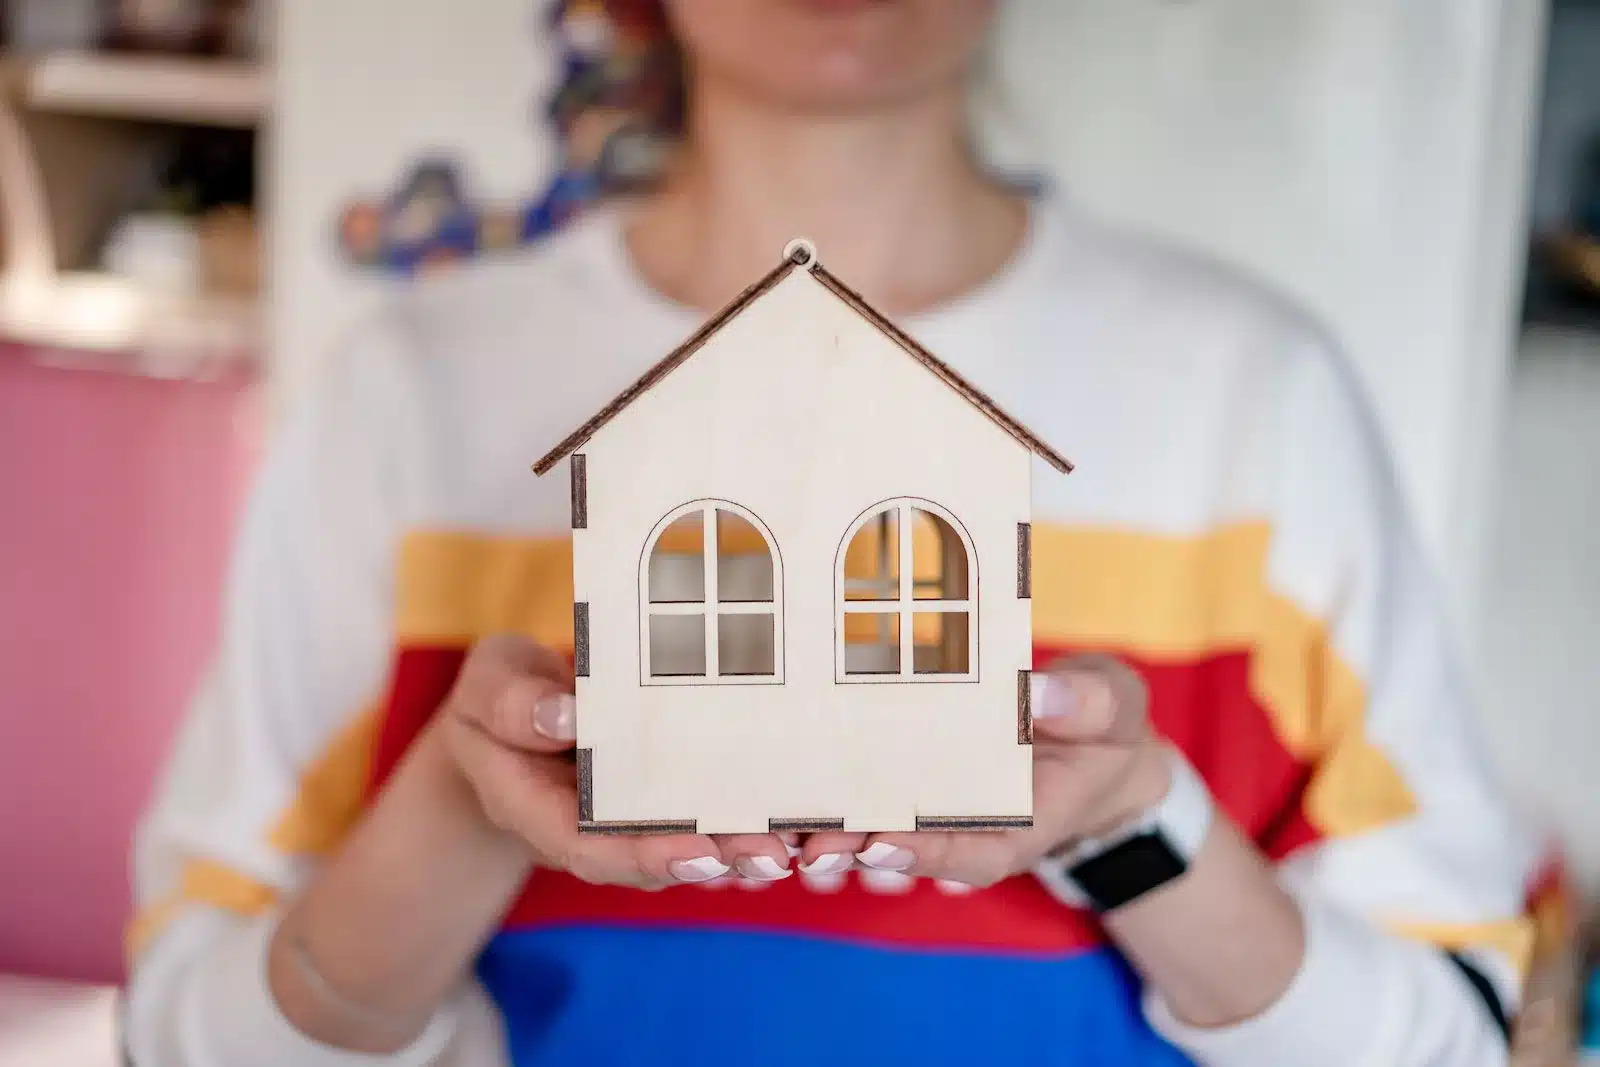 A pair of hands holding a model or miniature of a building, symbolizing the concept of the Baarda Model.